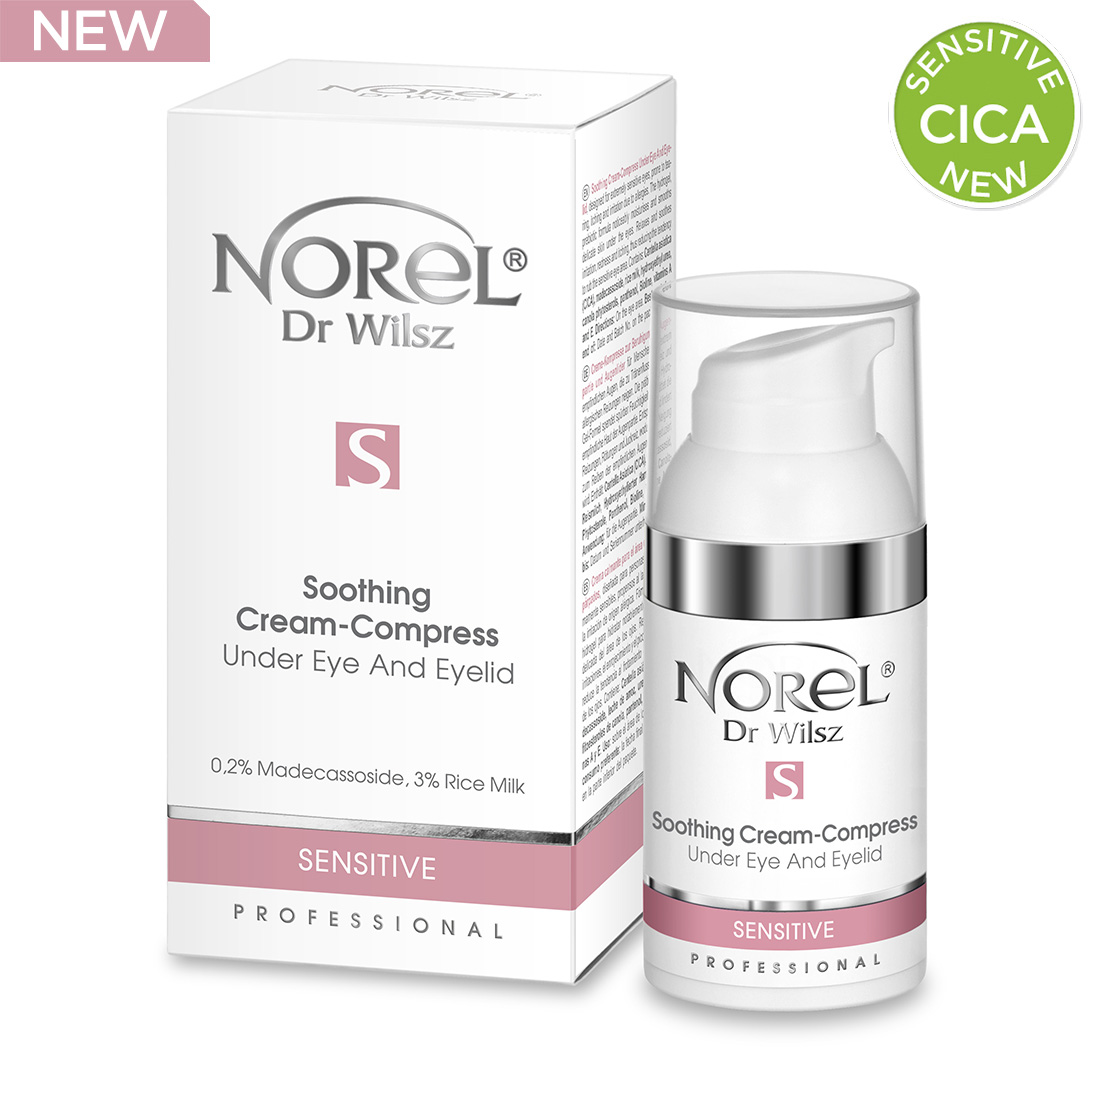 Soothing Cream-Compress Under Eye And Eyelid